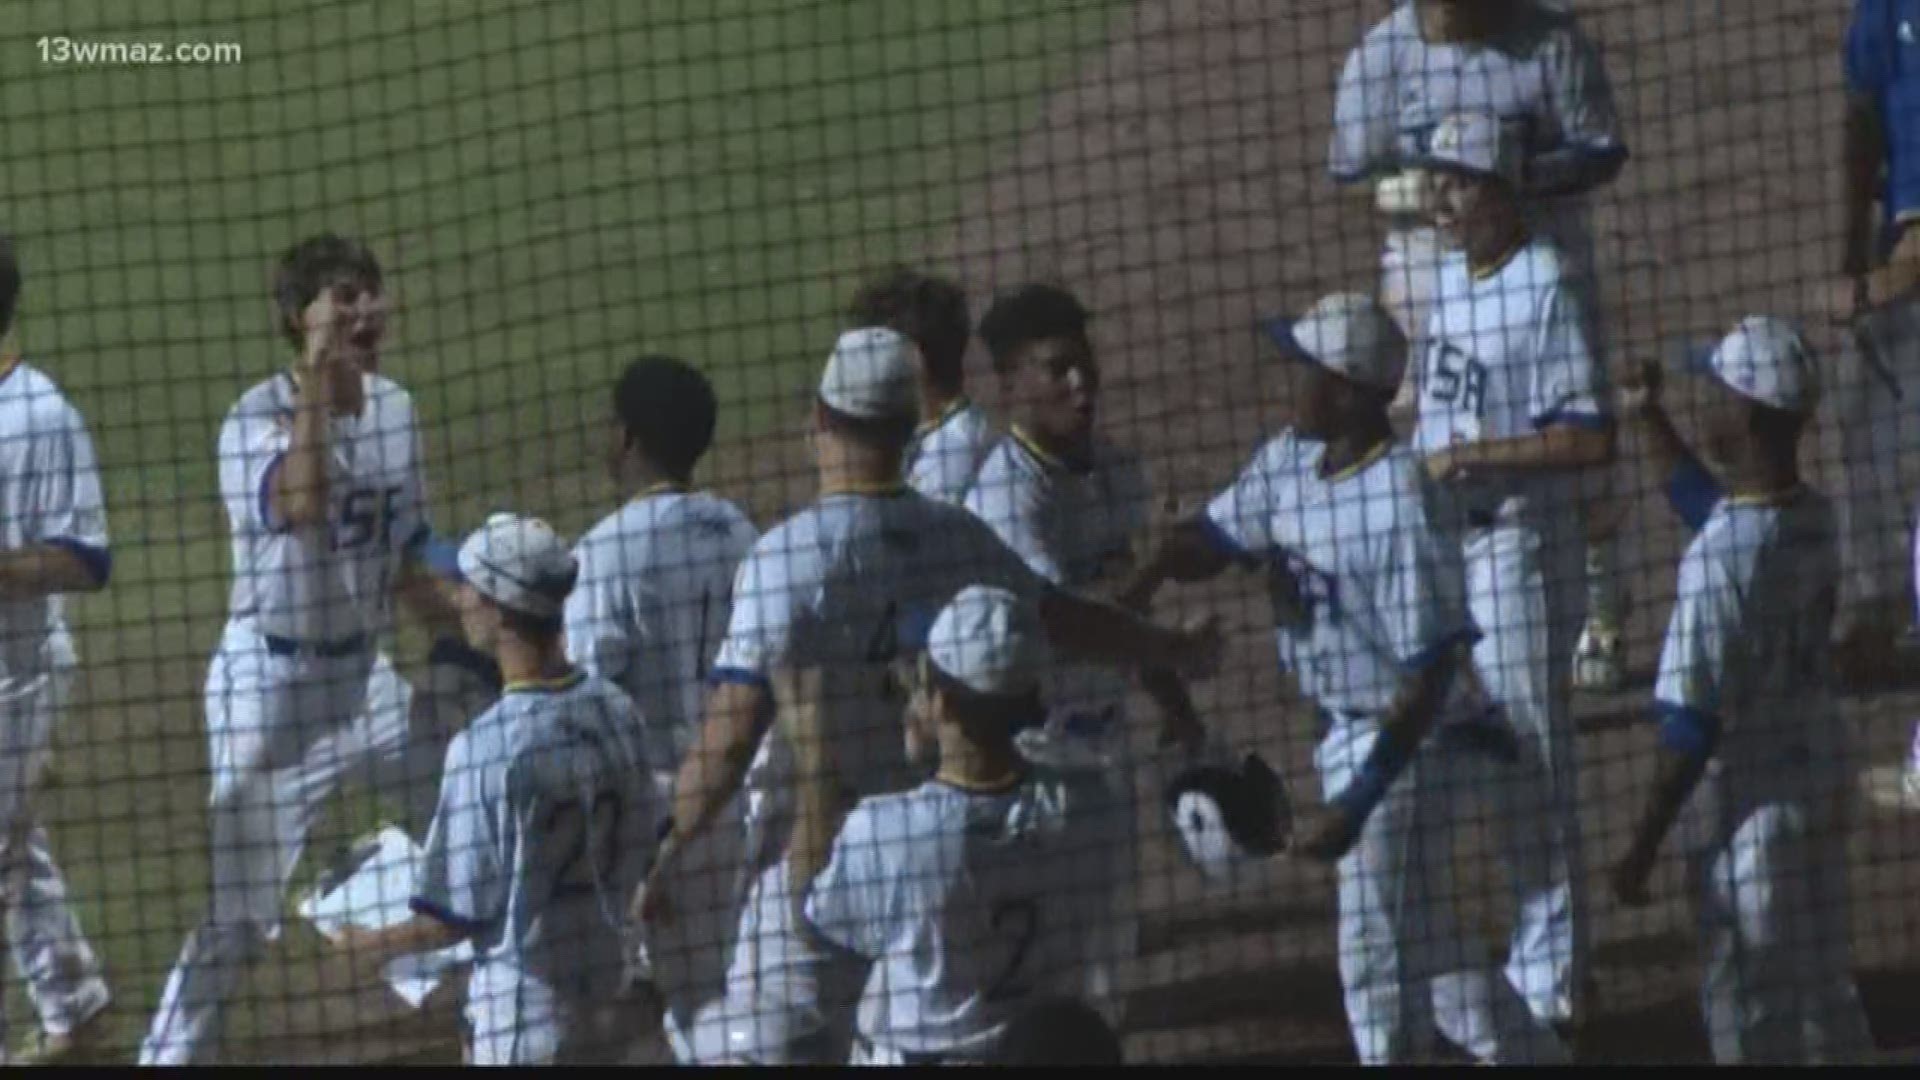 The Tattnall Trojans are once again Class A State Champions. They have won 6 state titles over the past 8 years, including their latest with Savannah Christian on Tuesday at Grayson Stadium in Chatham County.